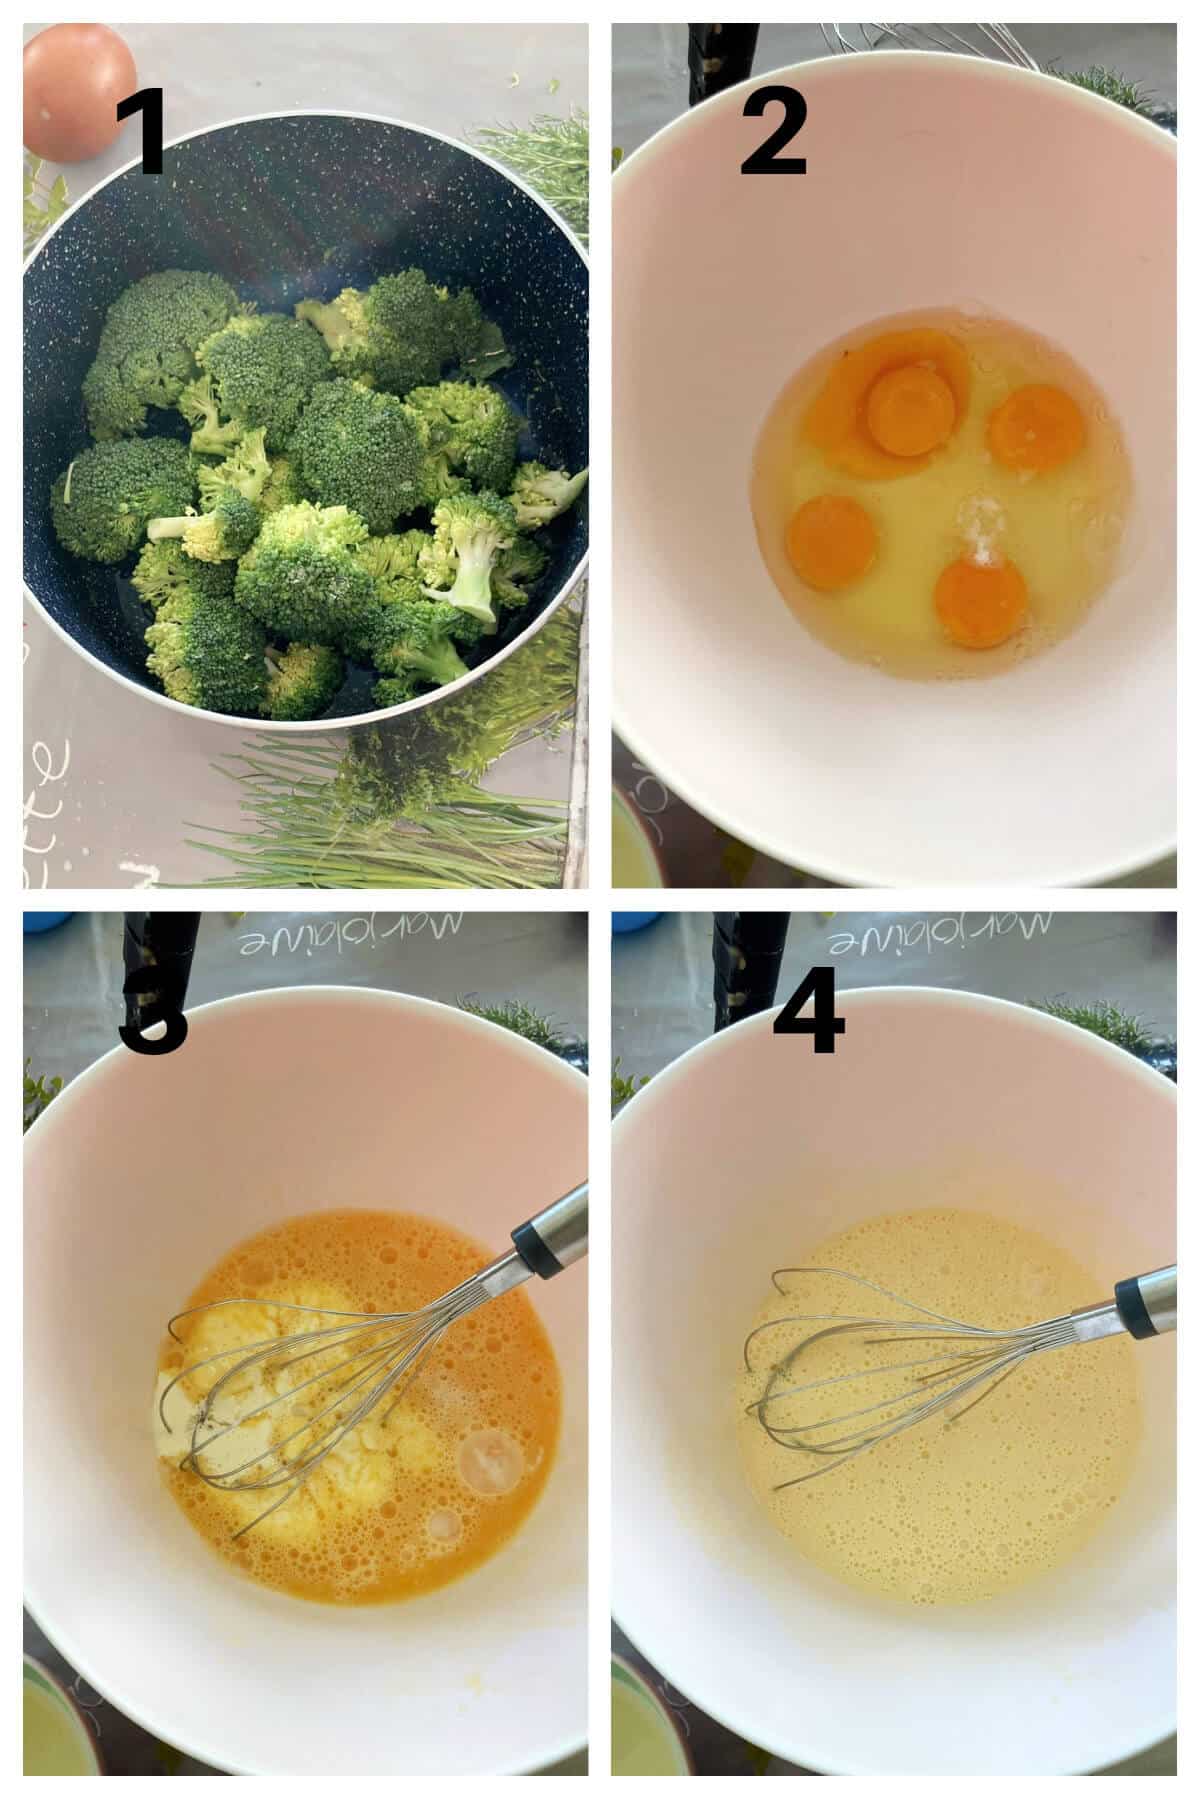 Collage of 4 photos to show how to make crustless quiche.